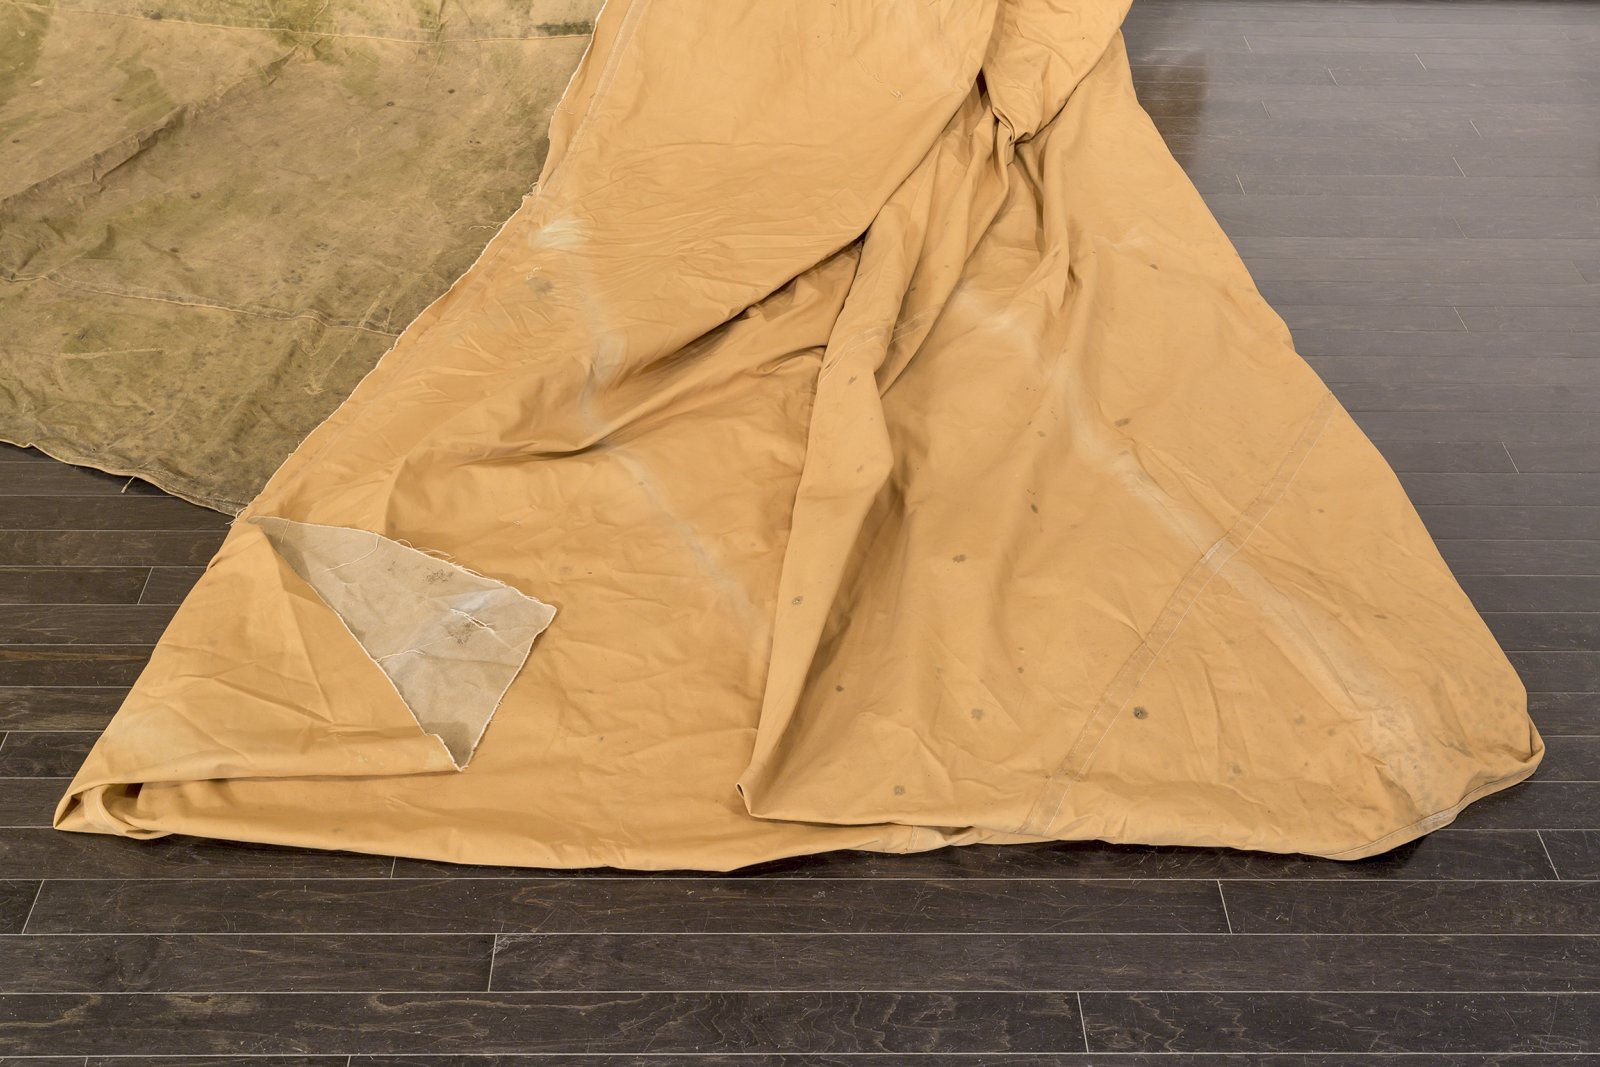 Duane Linklater, a gift from Doreen (detail), 2016, teepee canvas, nails, dimensions variable. Installation view, A Parallel Excavation, Art Gallery of Alberta, Edmonton, Canada, 2016